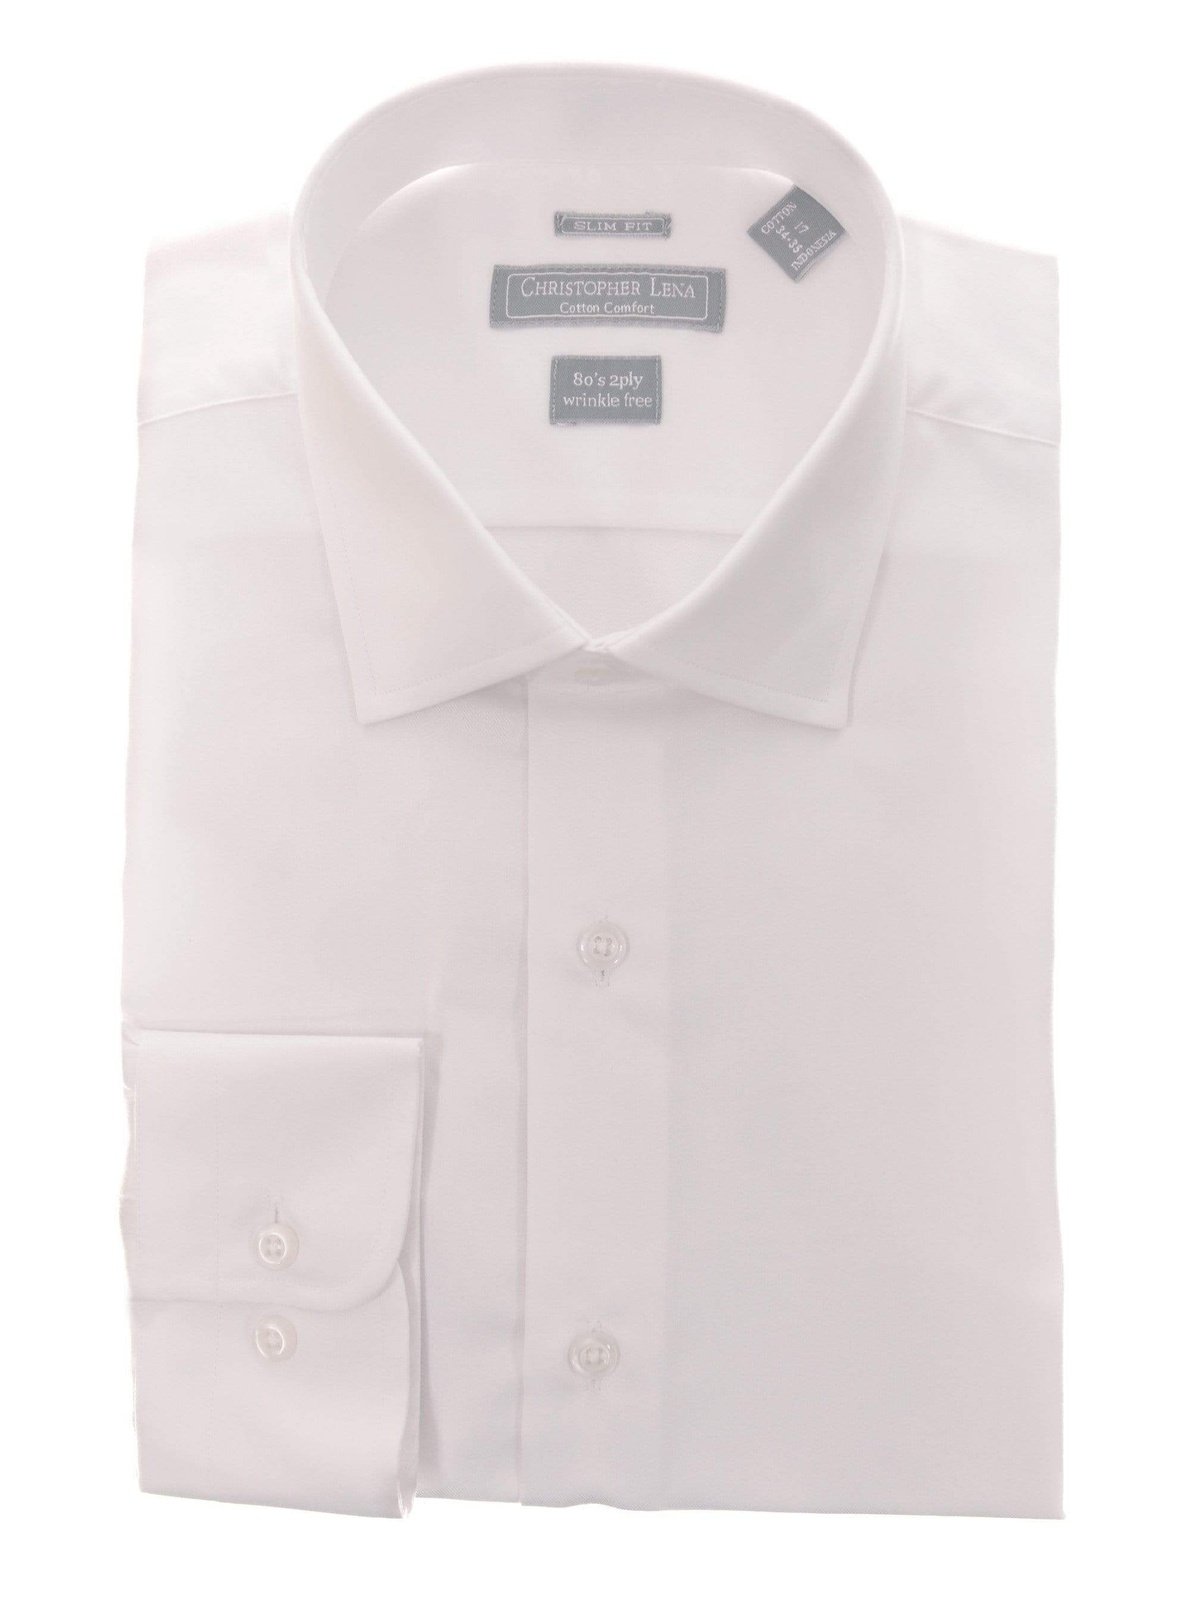 Christopher Lena SHIRTS White / 17 32/33 Mens Slim Fit Solid Spread Collar Cotton Wrinkle Free Dress Shirt